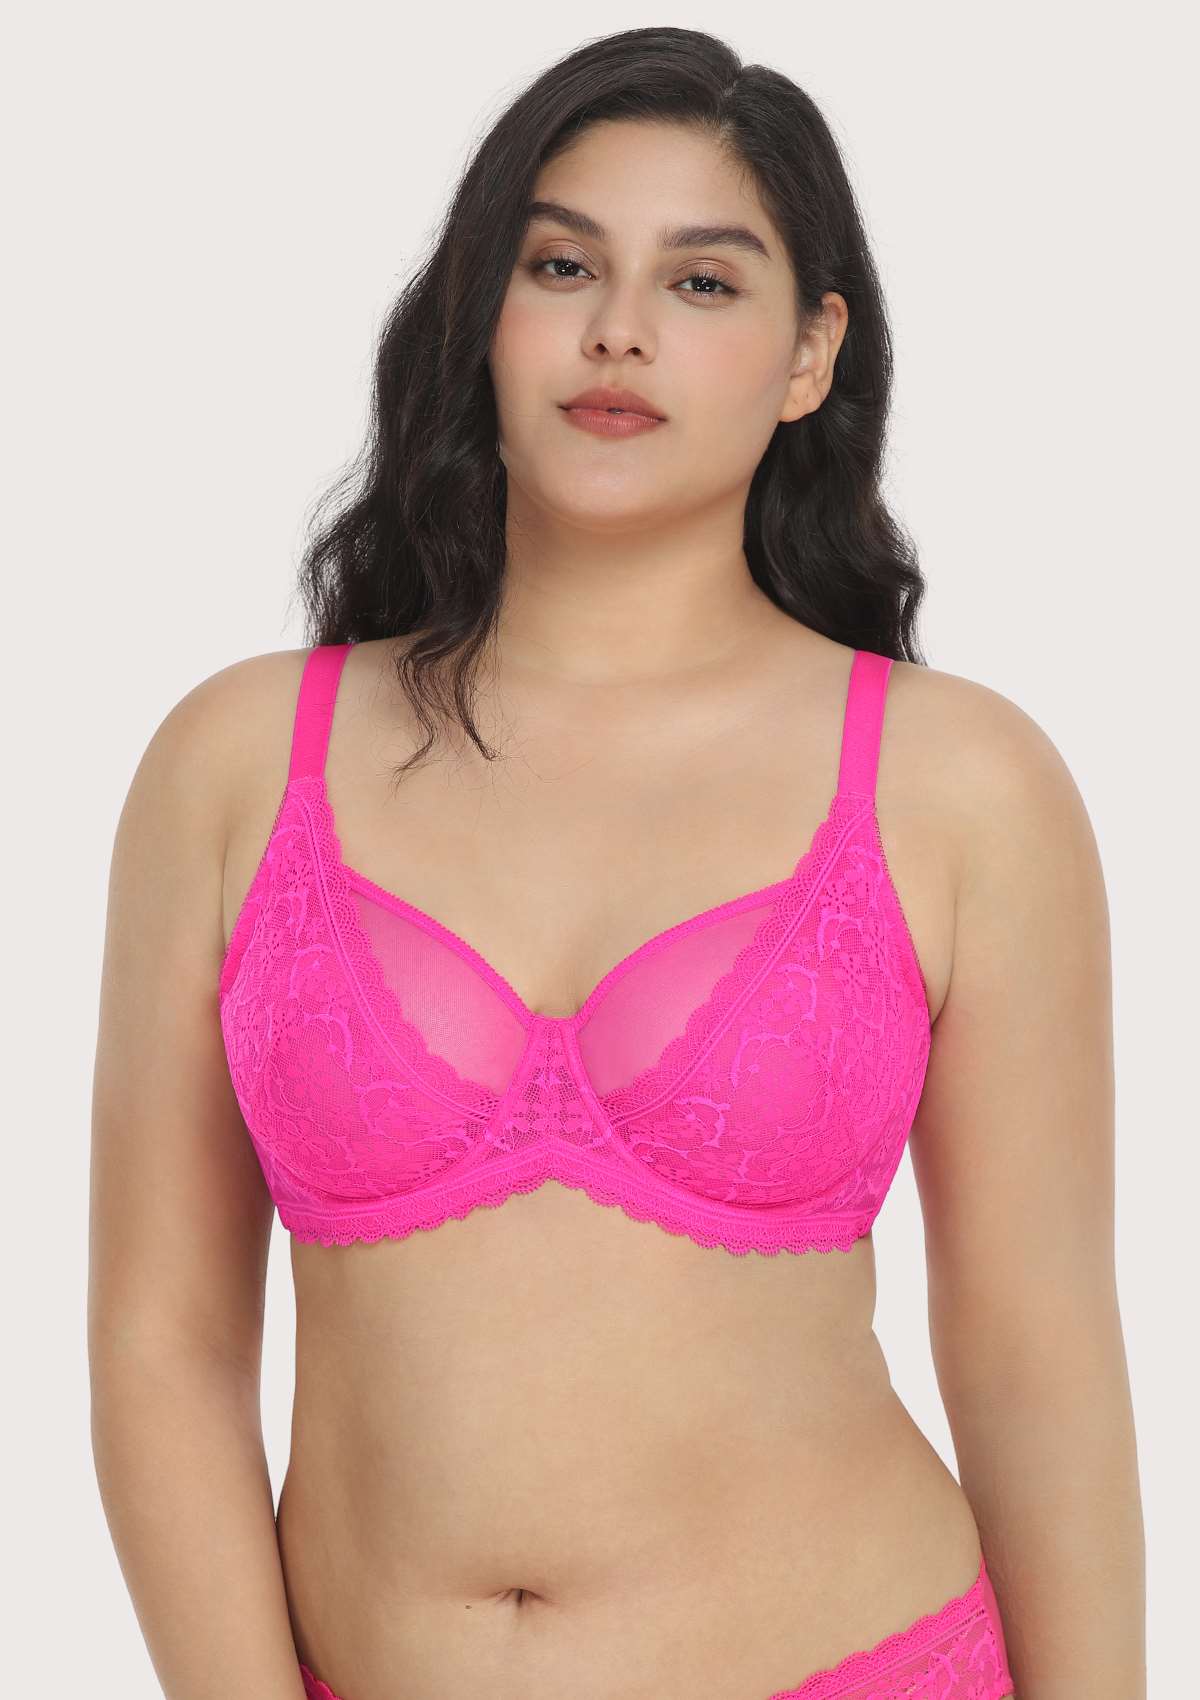 HSIA Anemone Lace Unlined Bra: Supportive, Lightweight Bra - Hot Pink / 40 / C